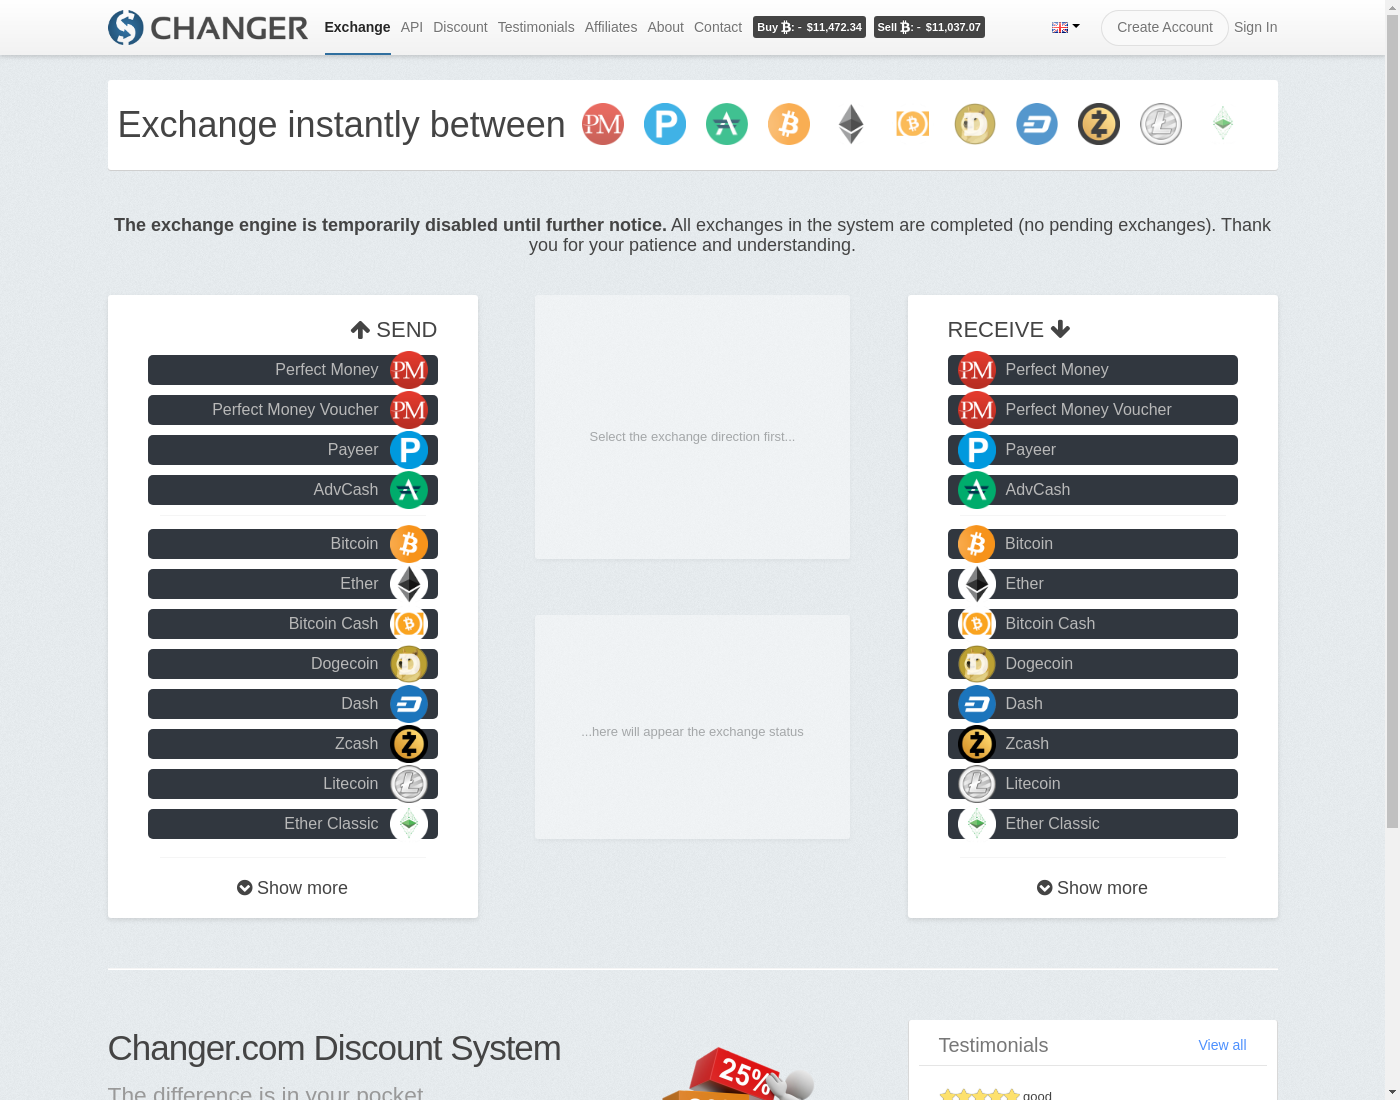 changer user interface: the home page in English